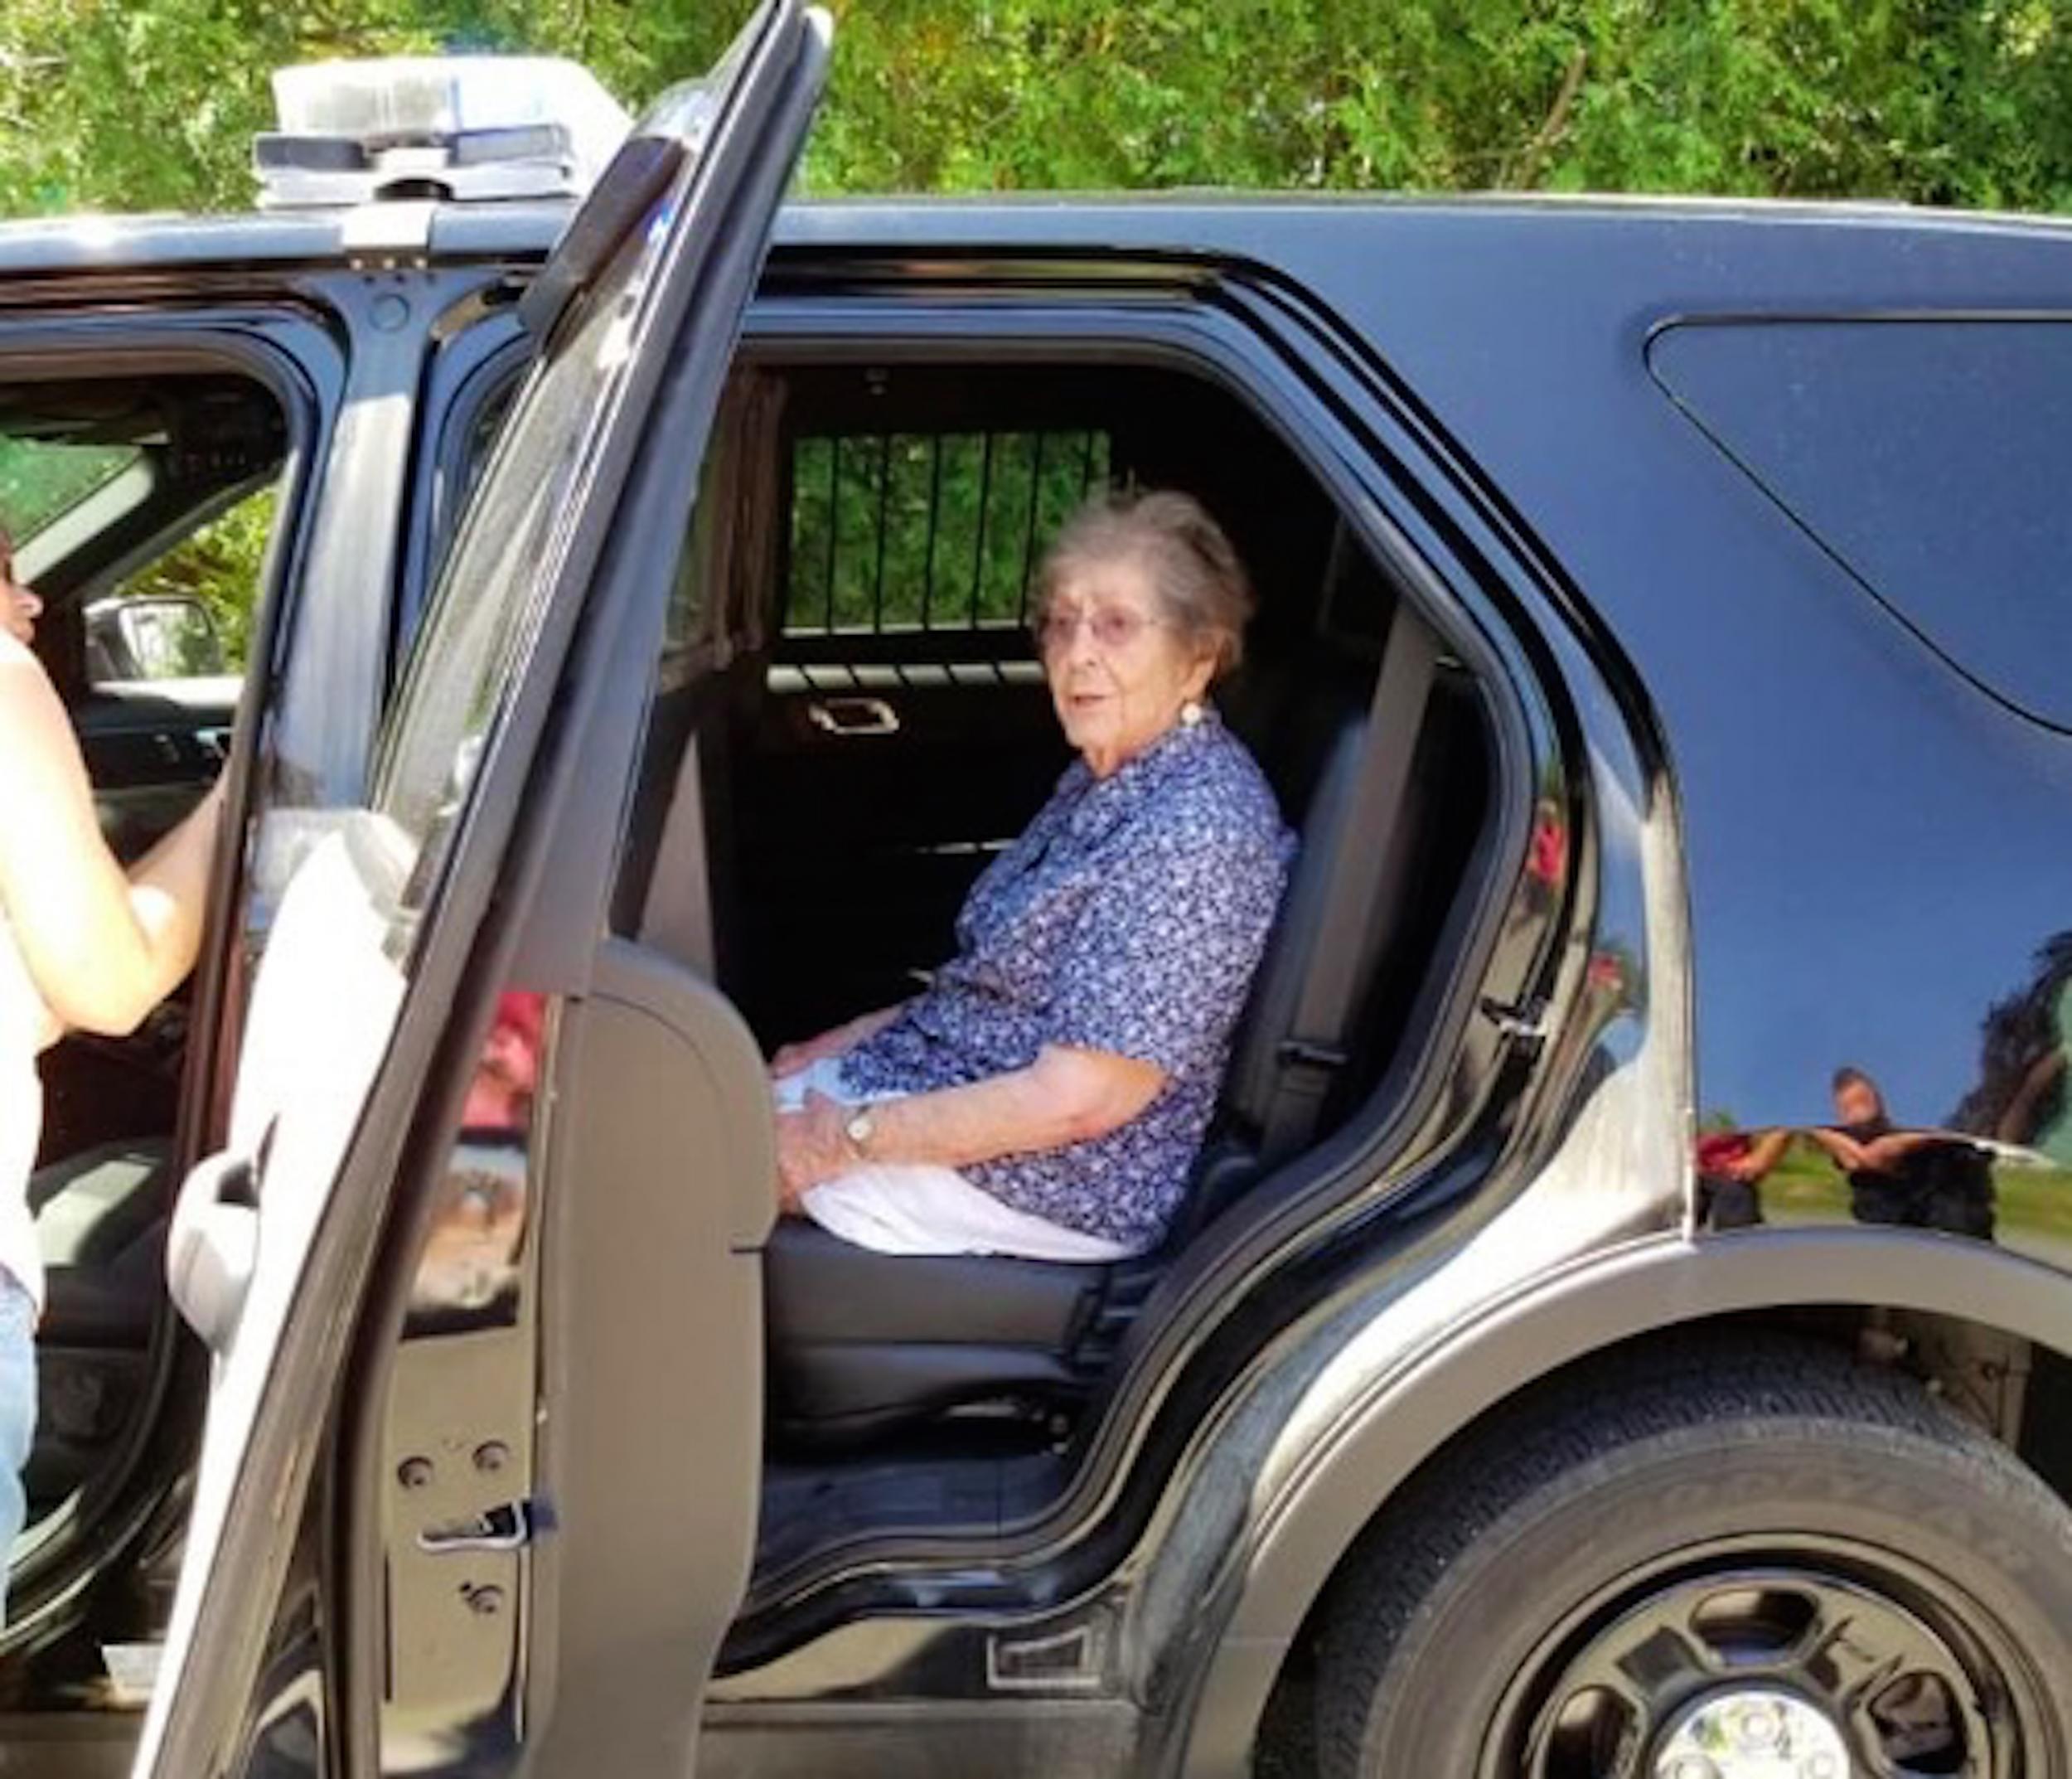 A 93-year-old woman in Maine is taken into a police car to experience a 'gentle arrest' on 9 July 2018